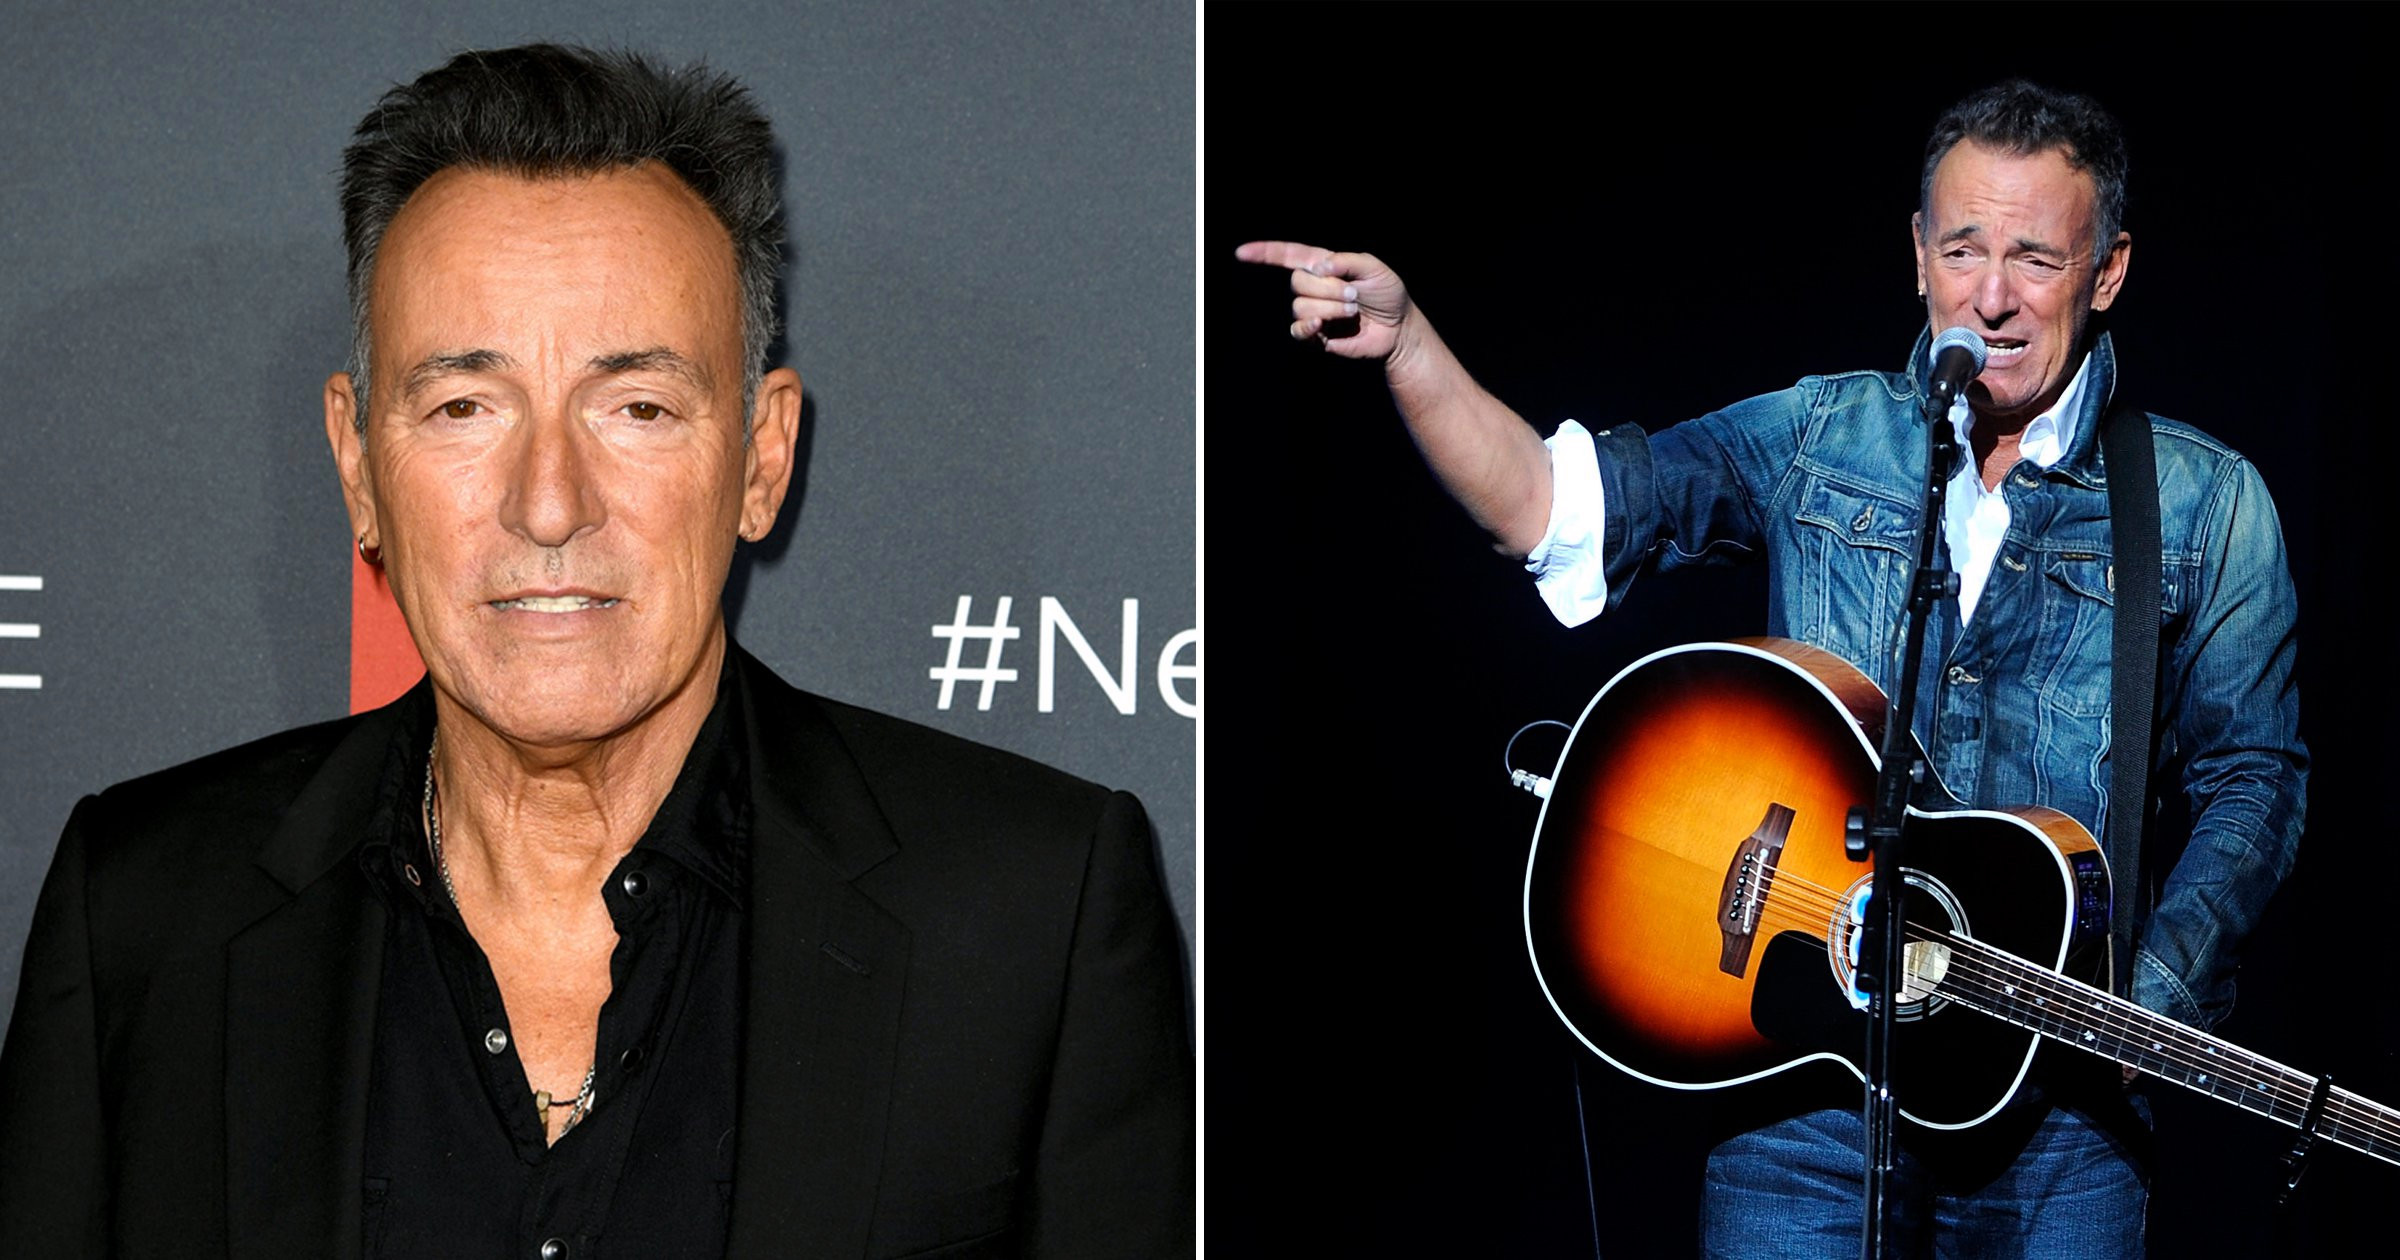 Bruce Springsteen ‘arrested for driving while intoxicated in November’